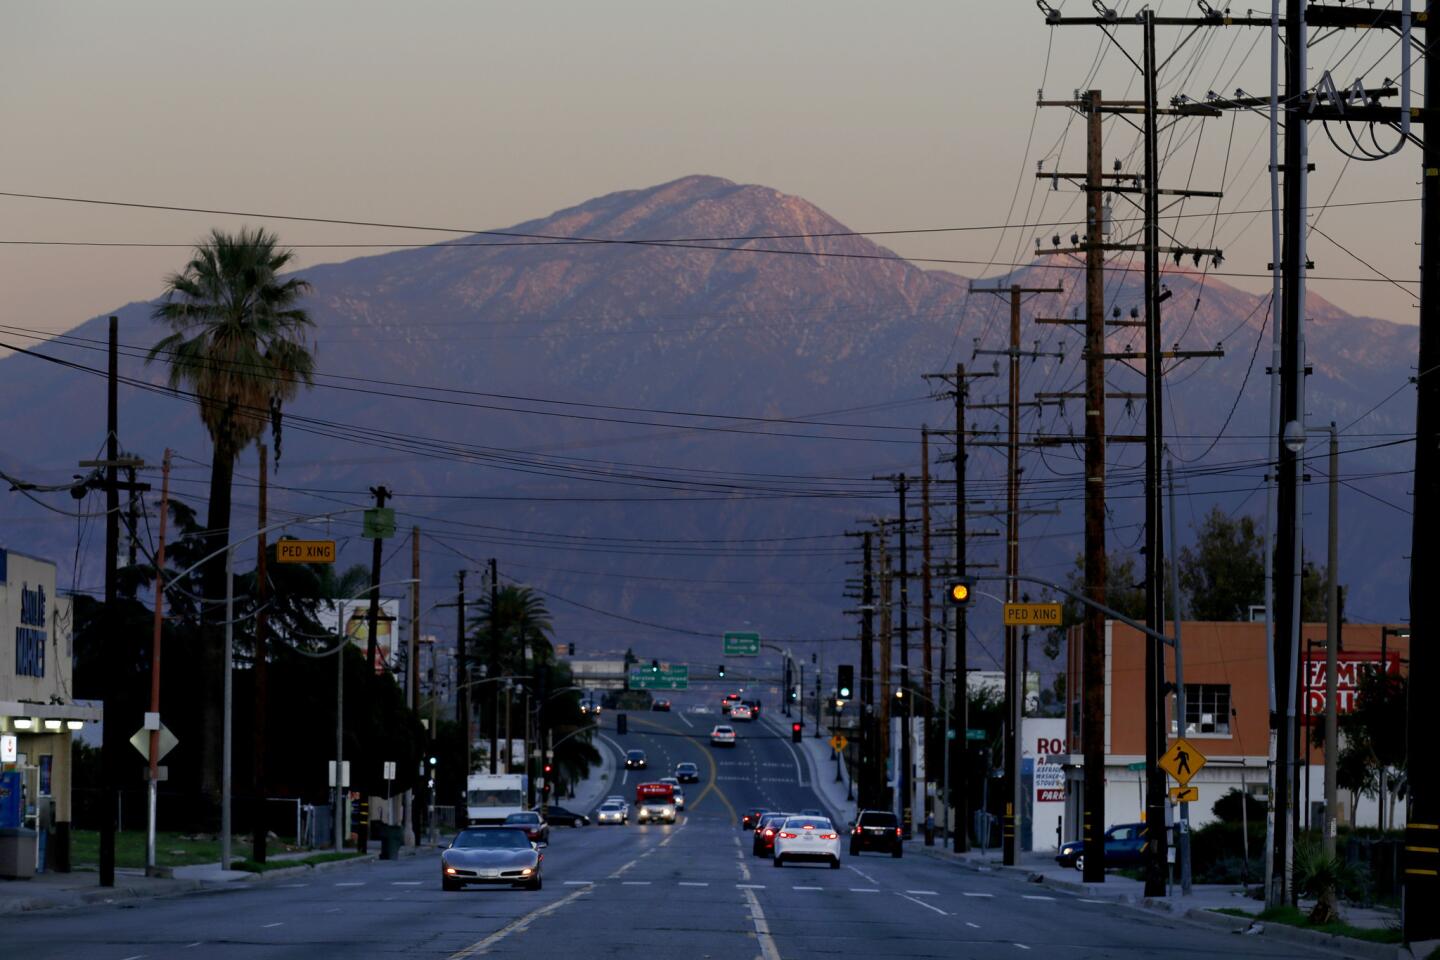 Pride and hope in San Bernardino after an ugly year of bloodshed